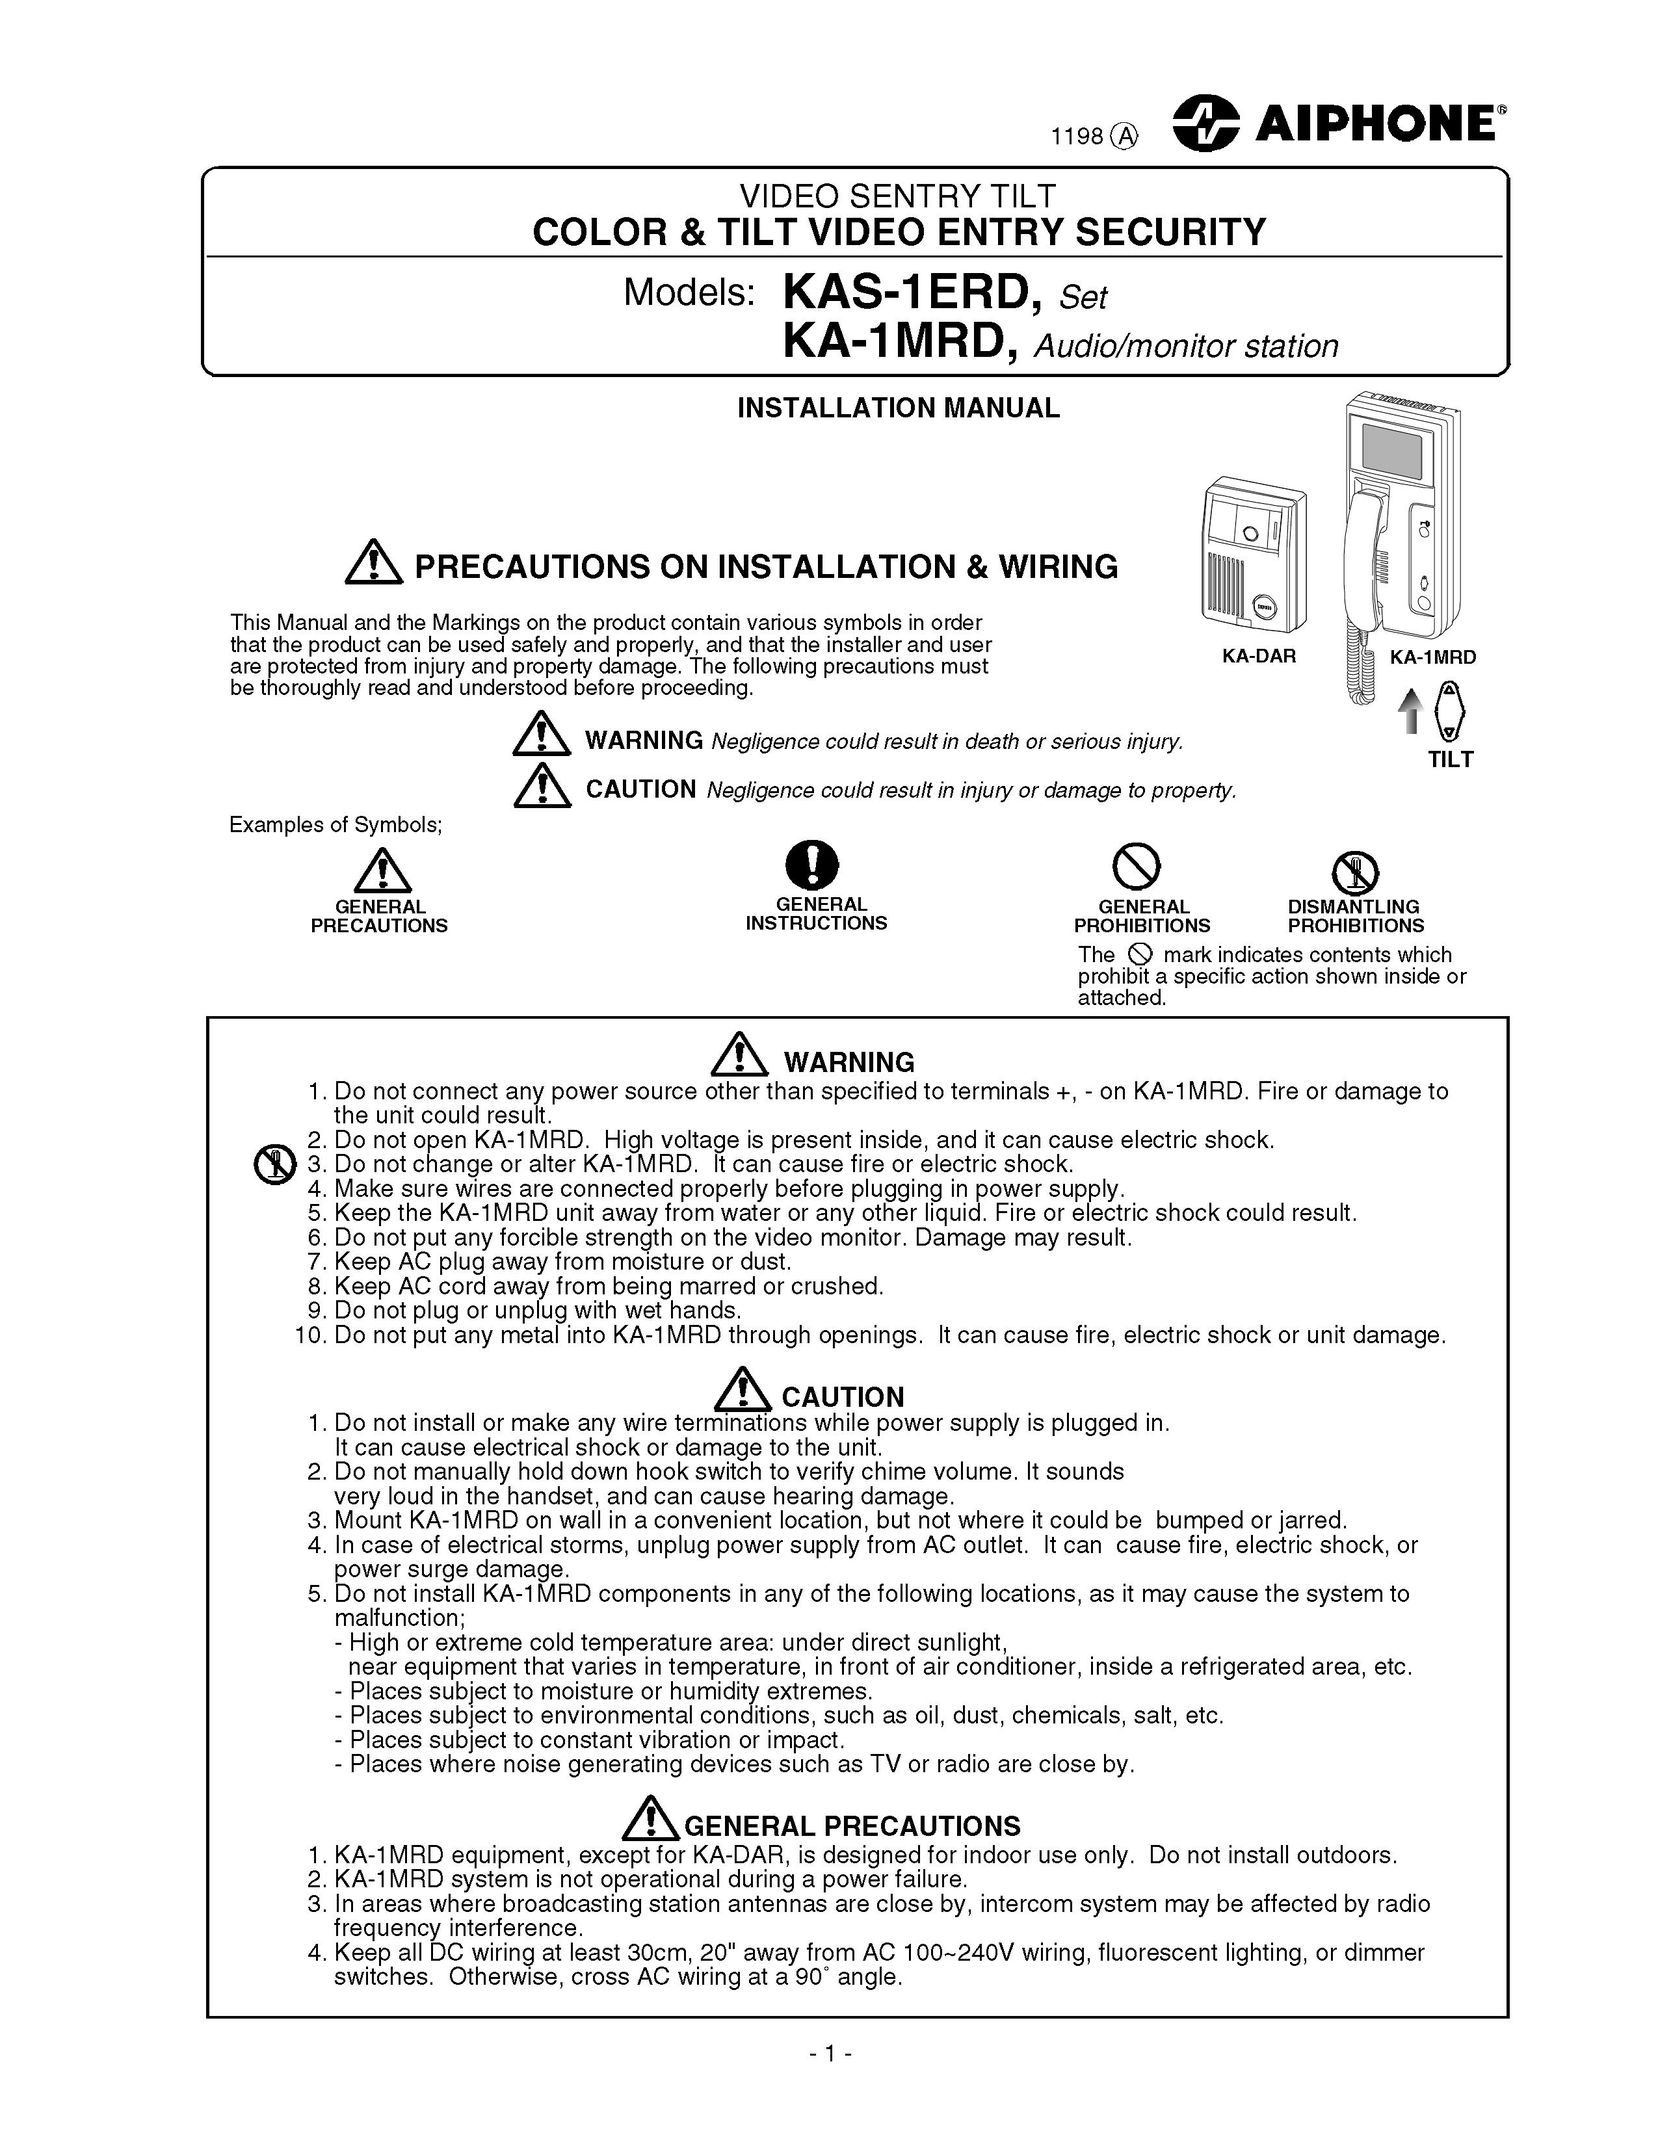 Aiphone KAS-1ERD Home Security System User Manual